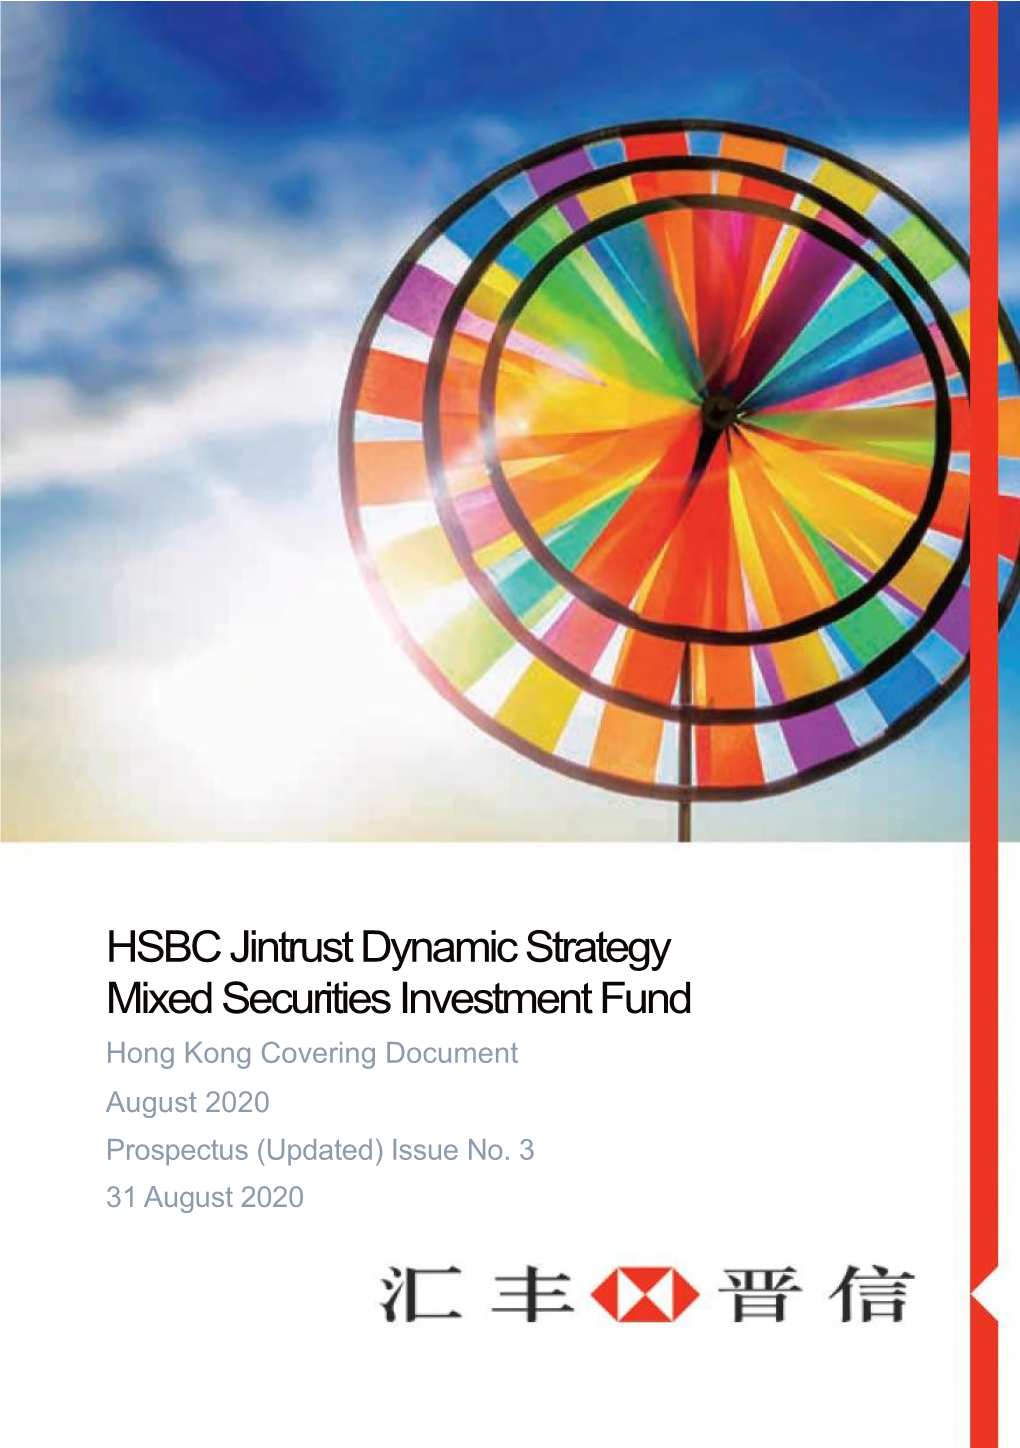 HSBC Jintrust Dynamic Strategy Mixed Securities Investment Fund Hong Kong Covering Document August 2020 Prospectus (Updated) Issue No